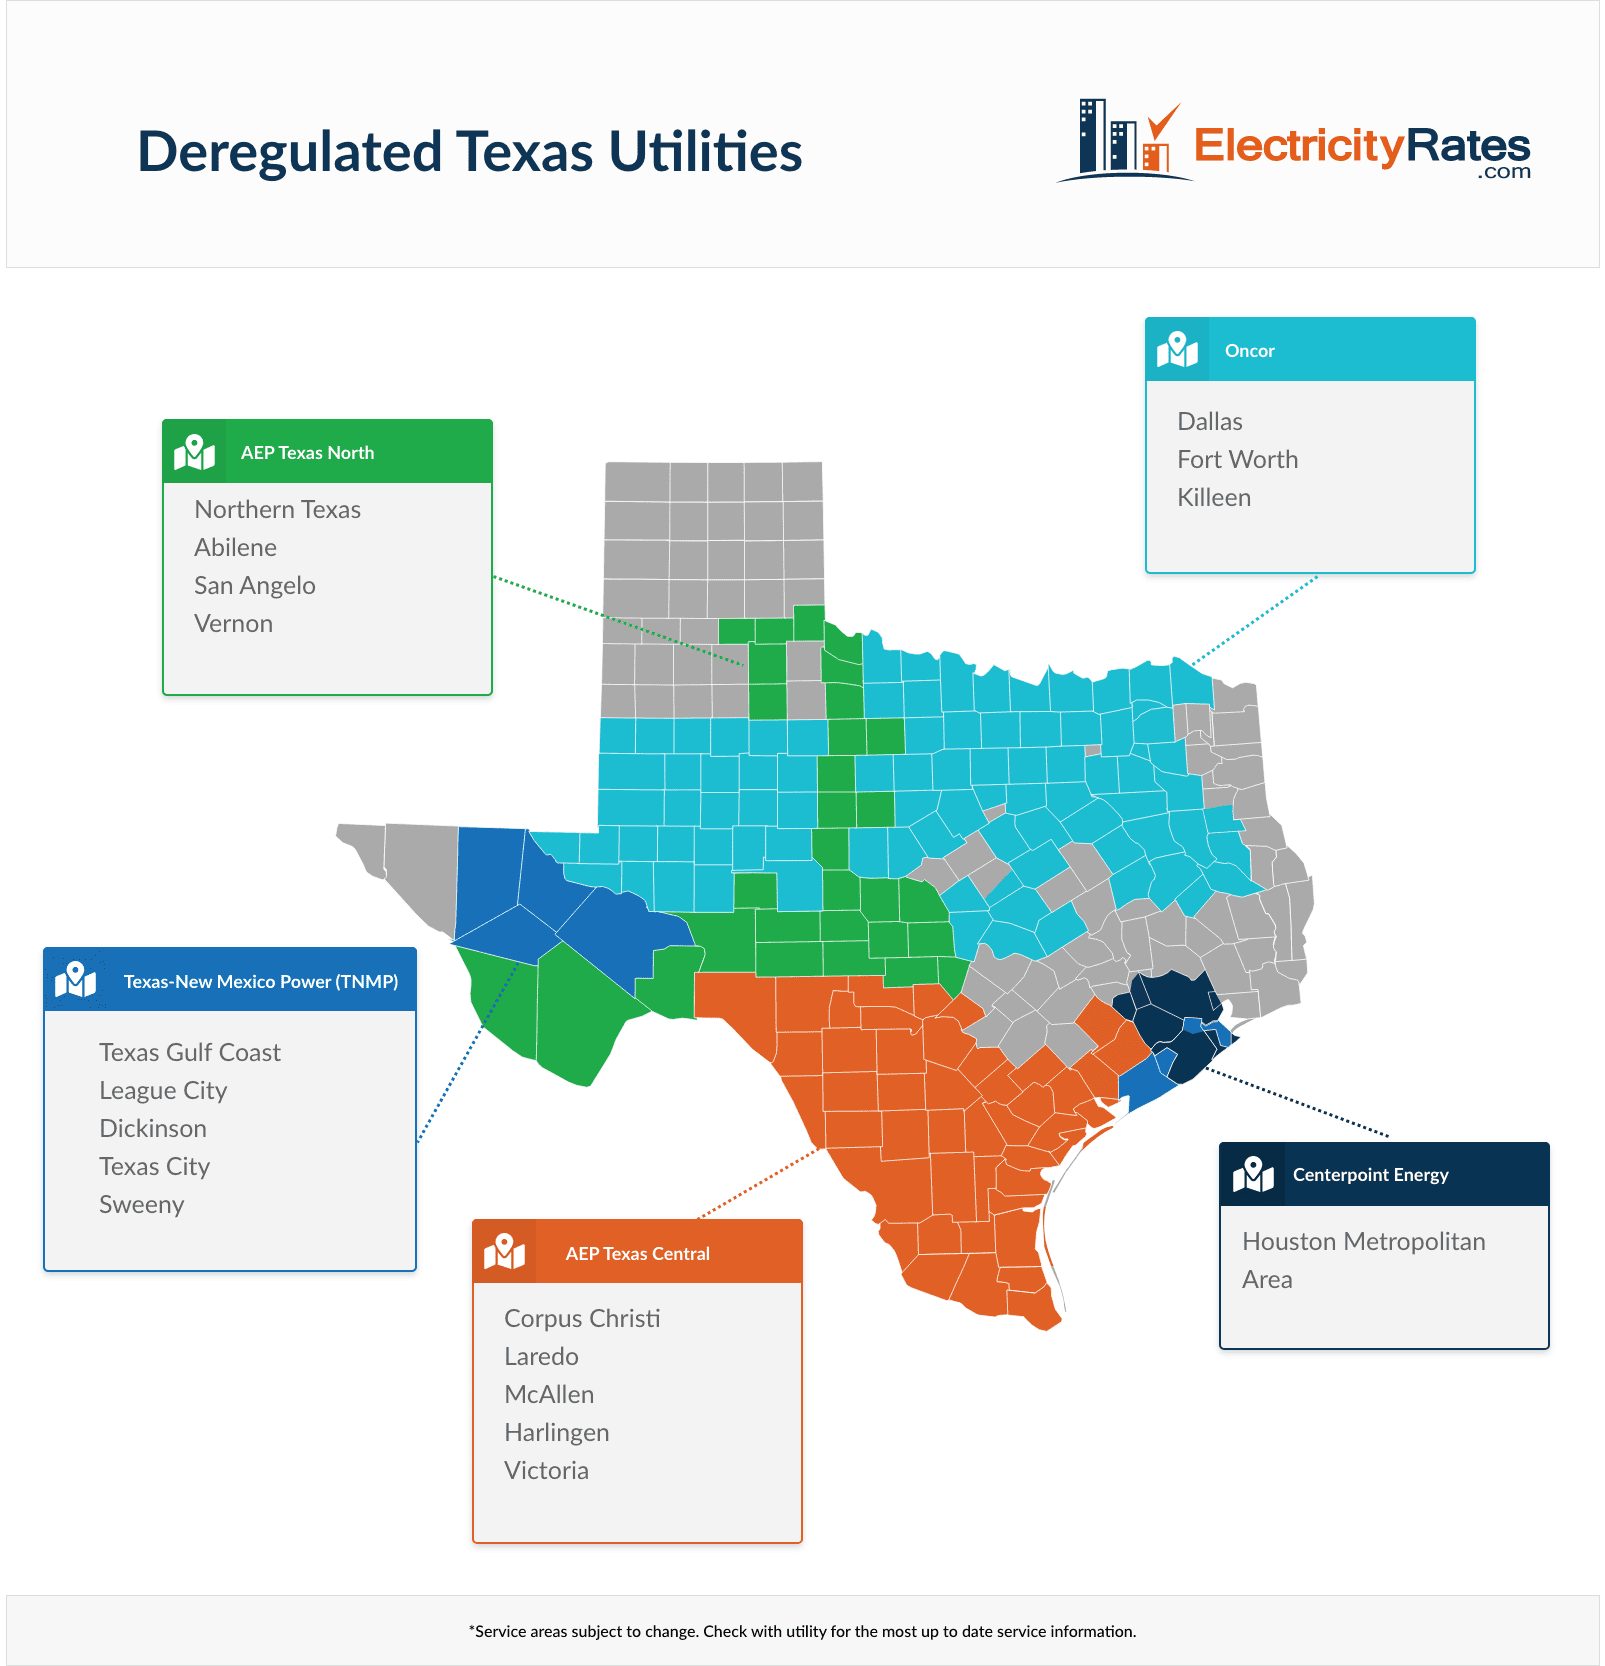 Electric Companies in Texas